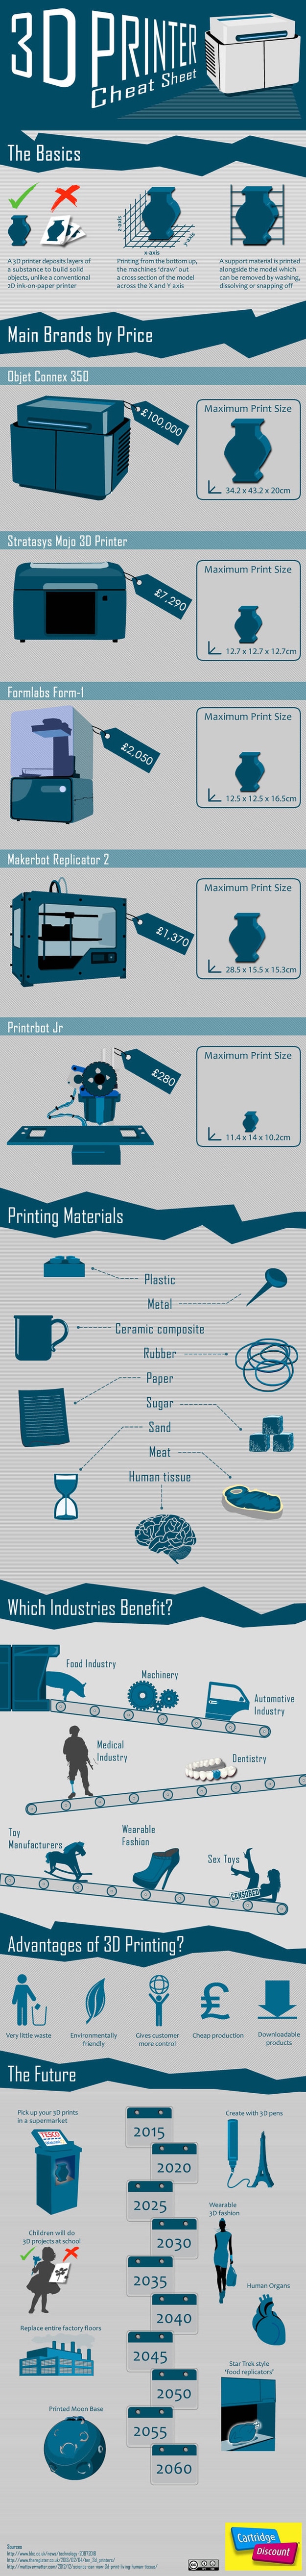 3D Printing 101: How It Works & Potential Applications [Infographic]